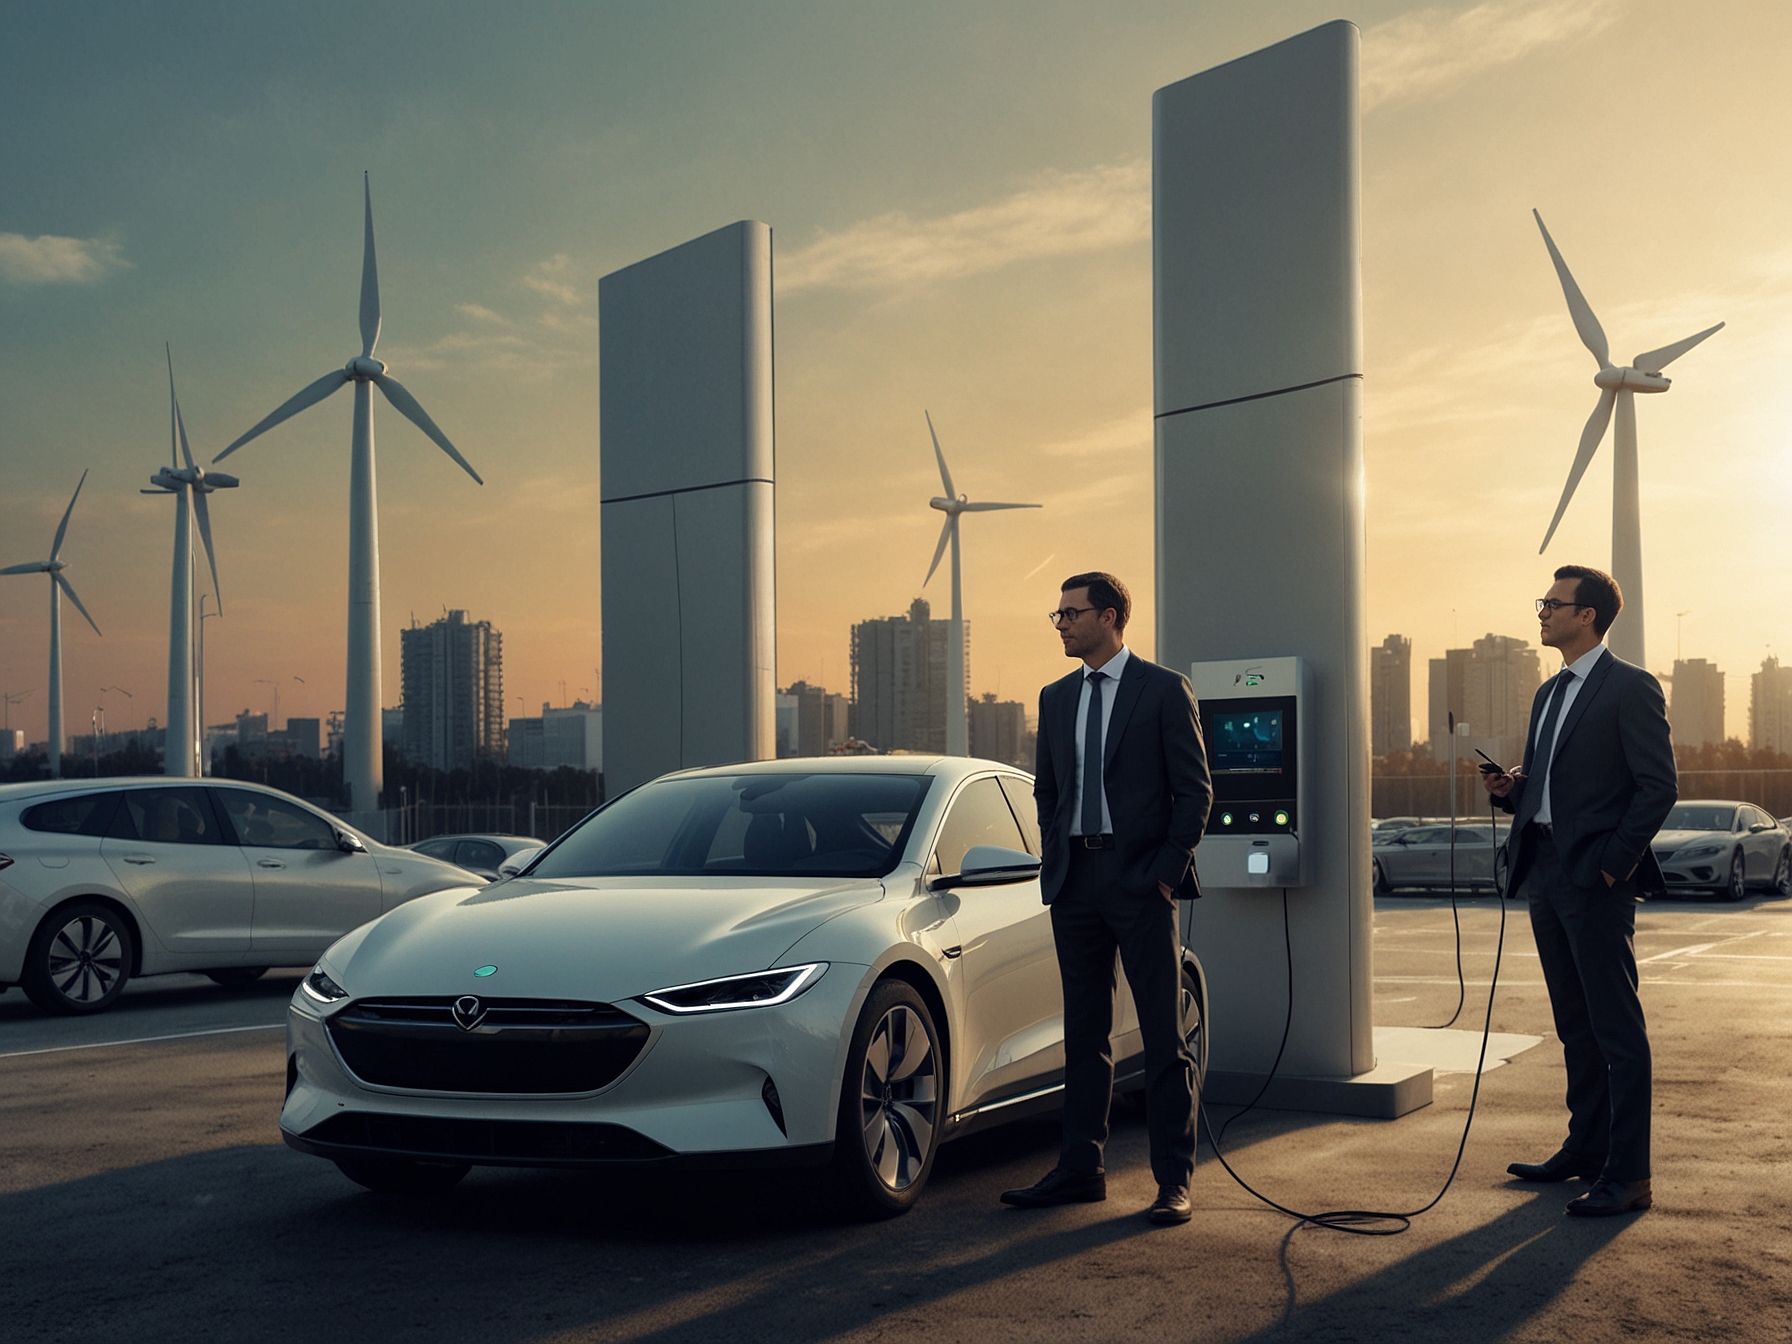 A collaborative scene depicting European industry leaders discussing advancements in EV technology, with a backdrop of modern infrastructure including charging stations and renewable energy sources.